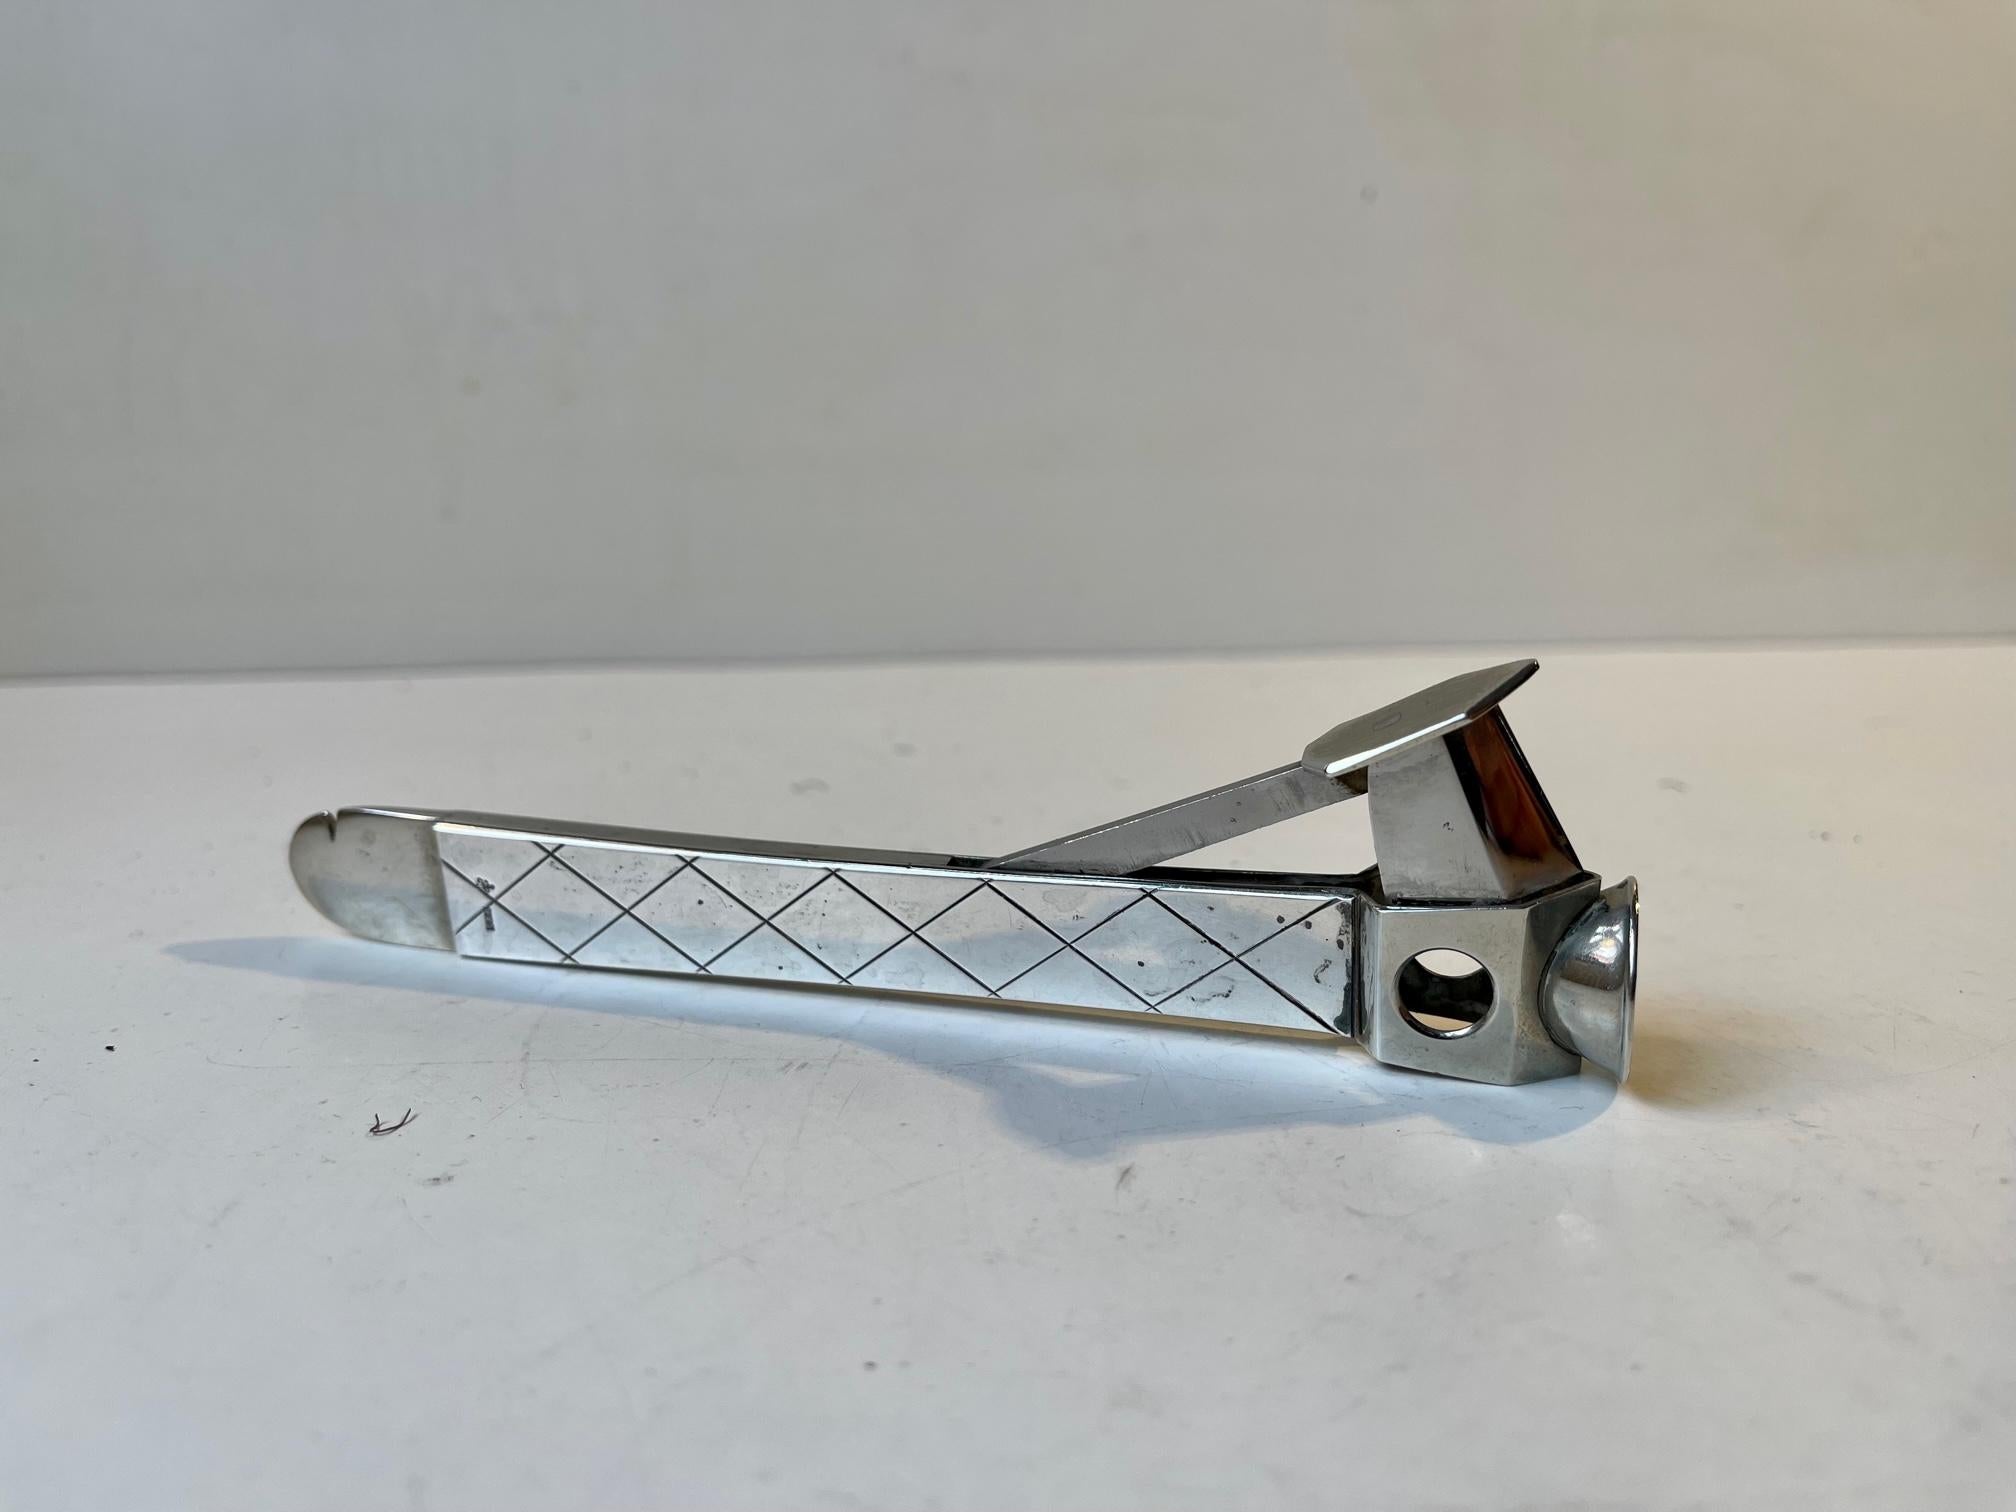 By an unknown Scandinavian Silversmith. Fine cigar cutter executed with handle in 925 sterling silver (signed and hallmarked). Cutting mechanism executed in stainless German steel. Made during the 1950s in either Denmark or Sweden. Measurements: L: